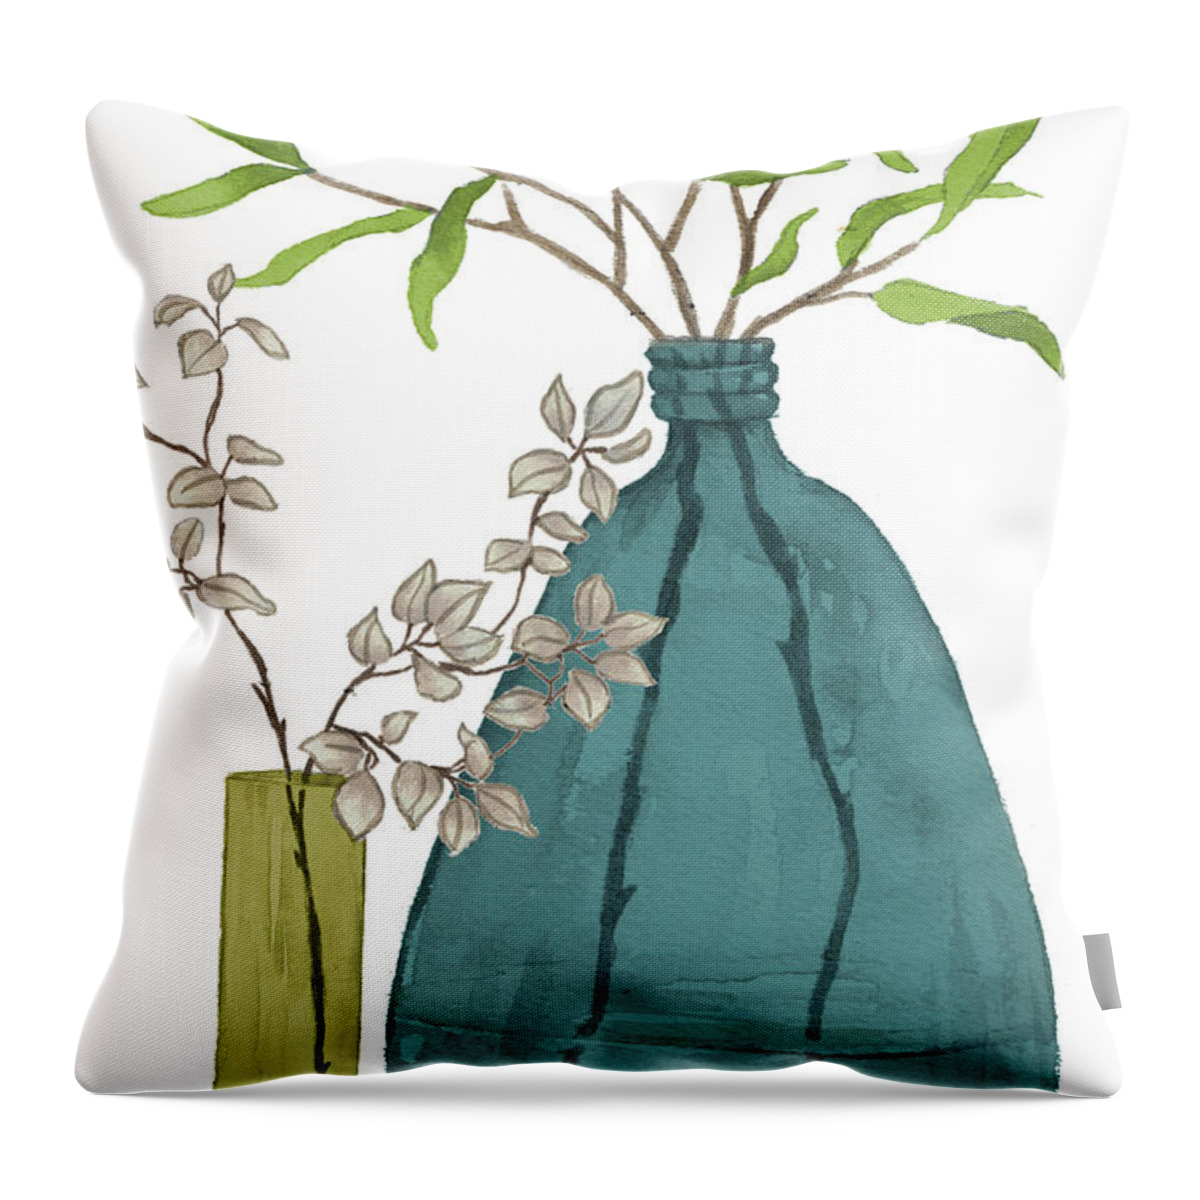 Serenity Throw Pillow featuring the mixed media Serenity Accents In Teal by Elizabeth Medley